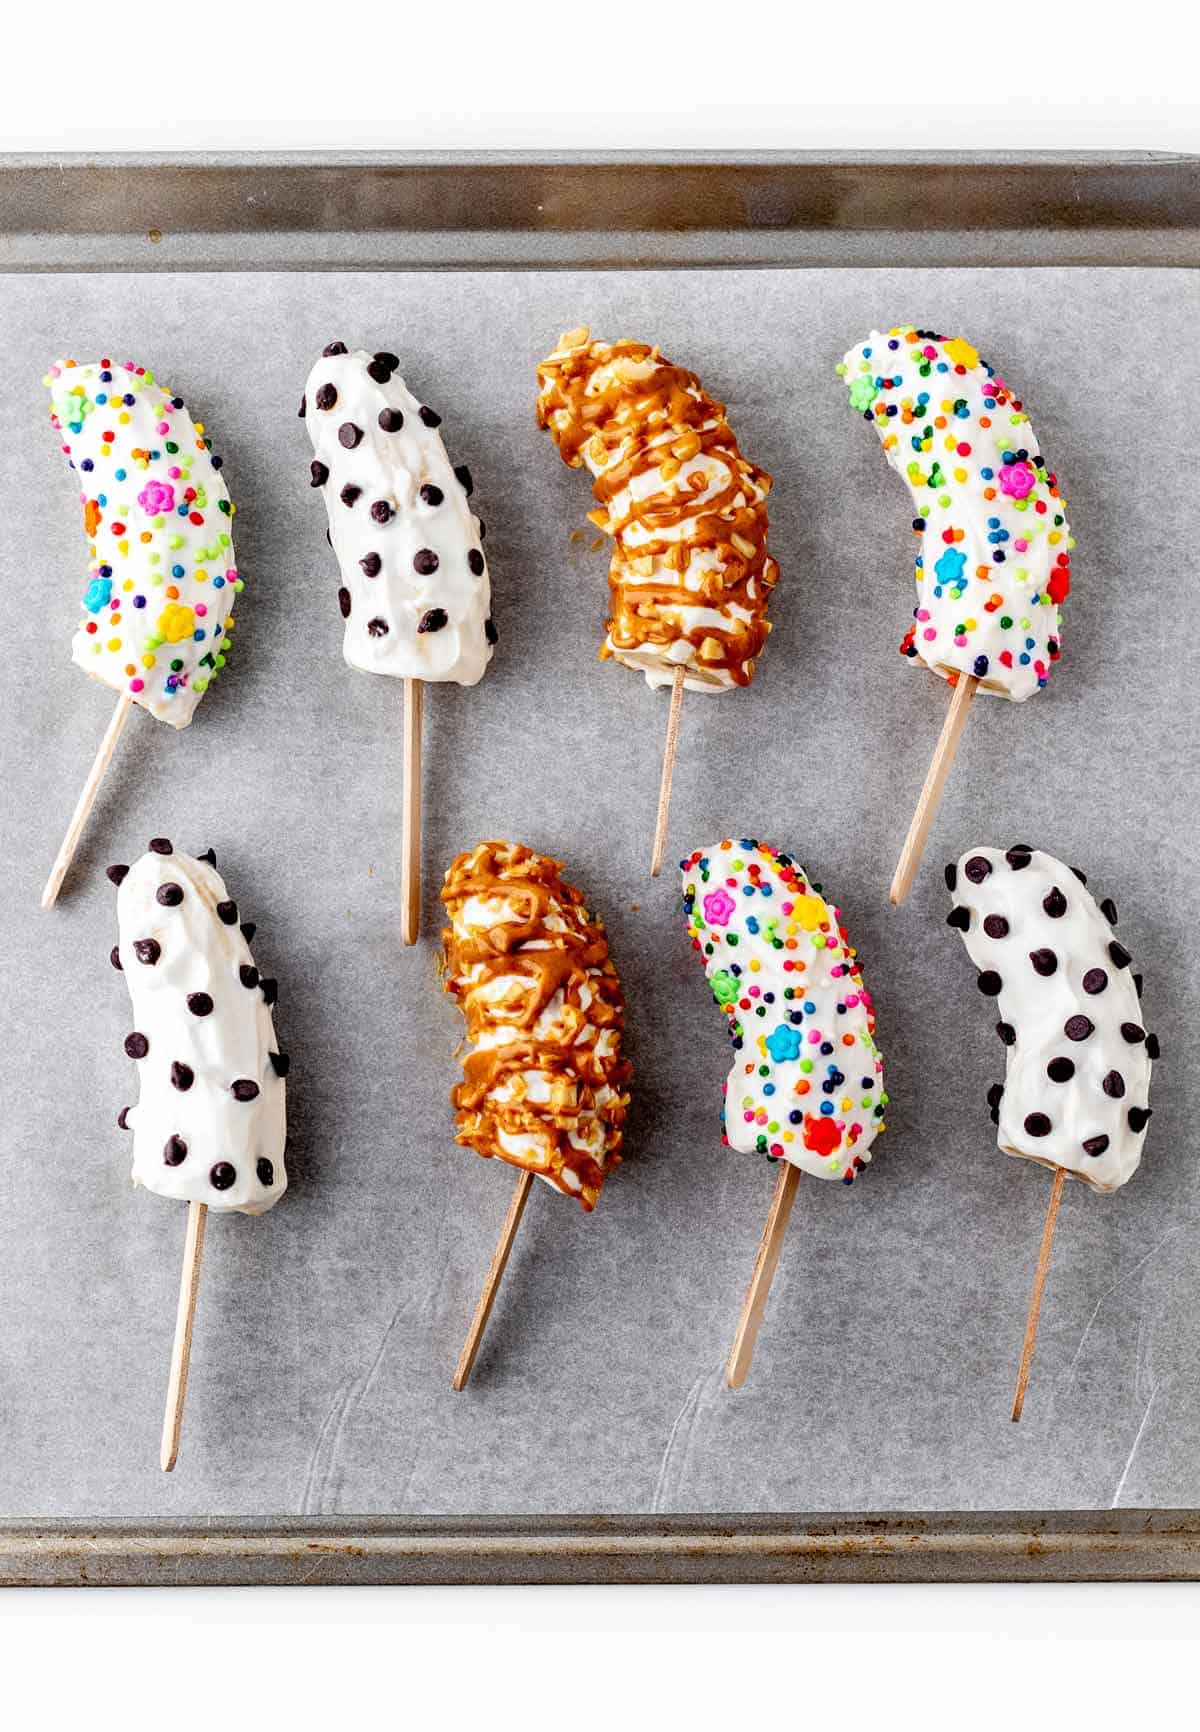 Frozen banana pops with yogurt decorated with sprinkles on a parchment paper lined baking sheet.